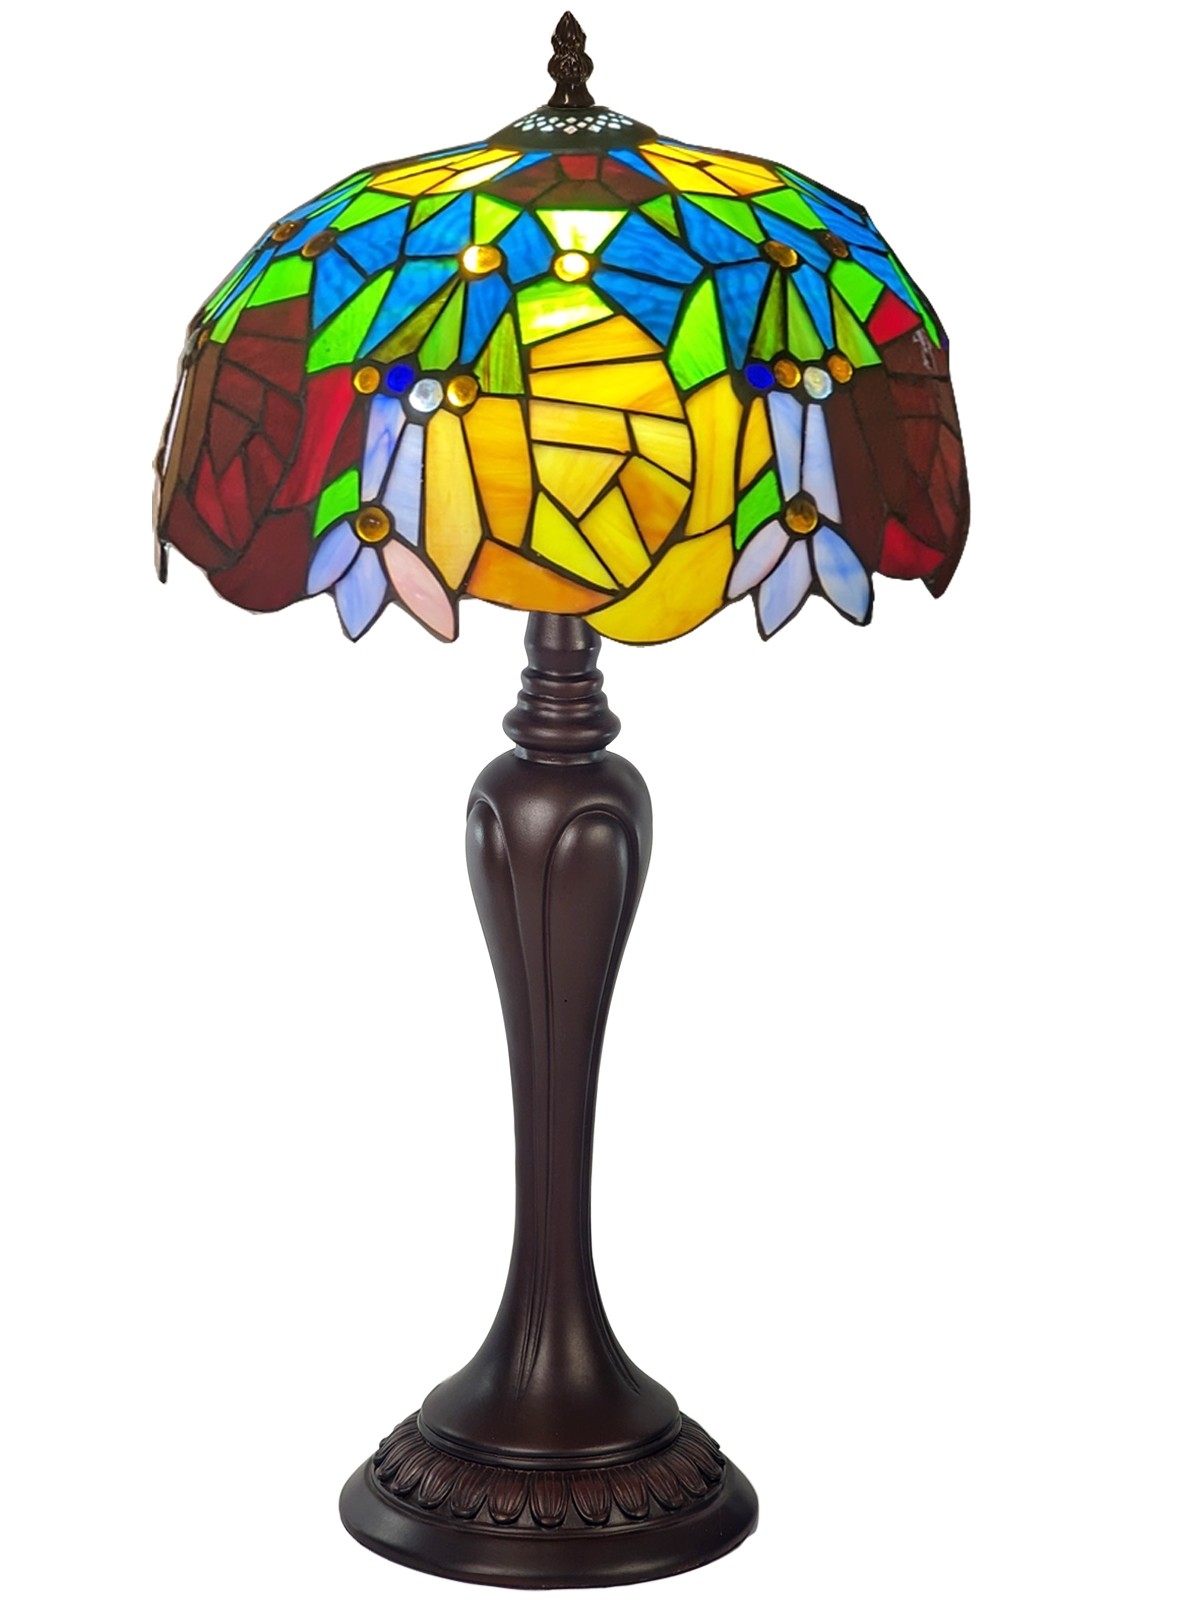 Rose & Snowdrop Design Tiffany Table Lamp 59cm With Serene Base + Free Incandescent Bulb